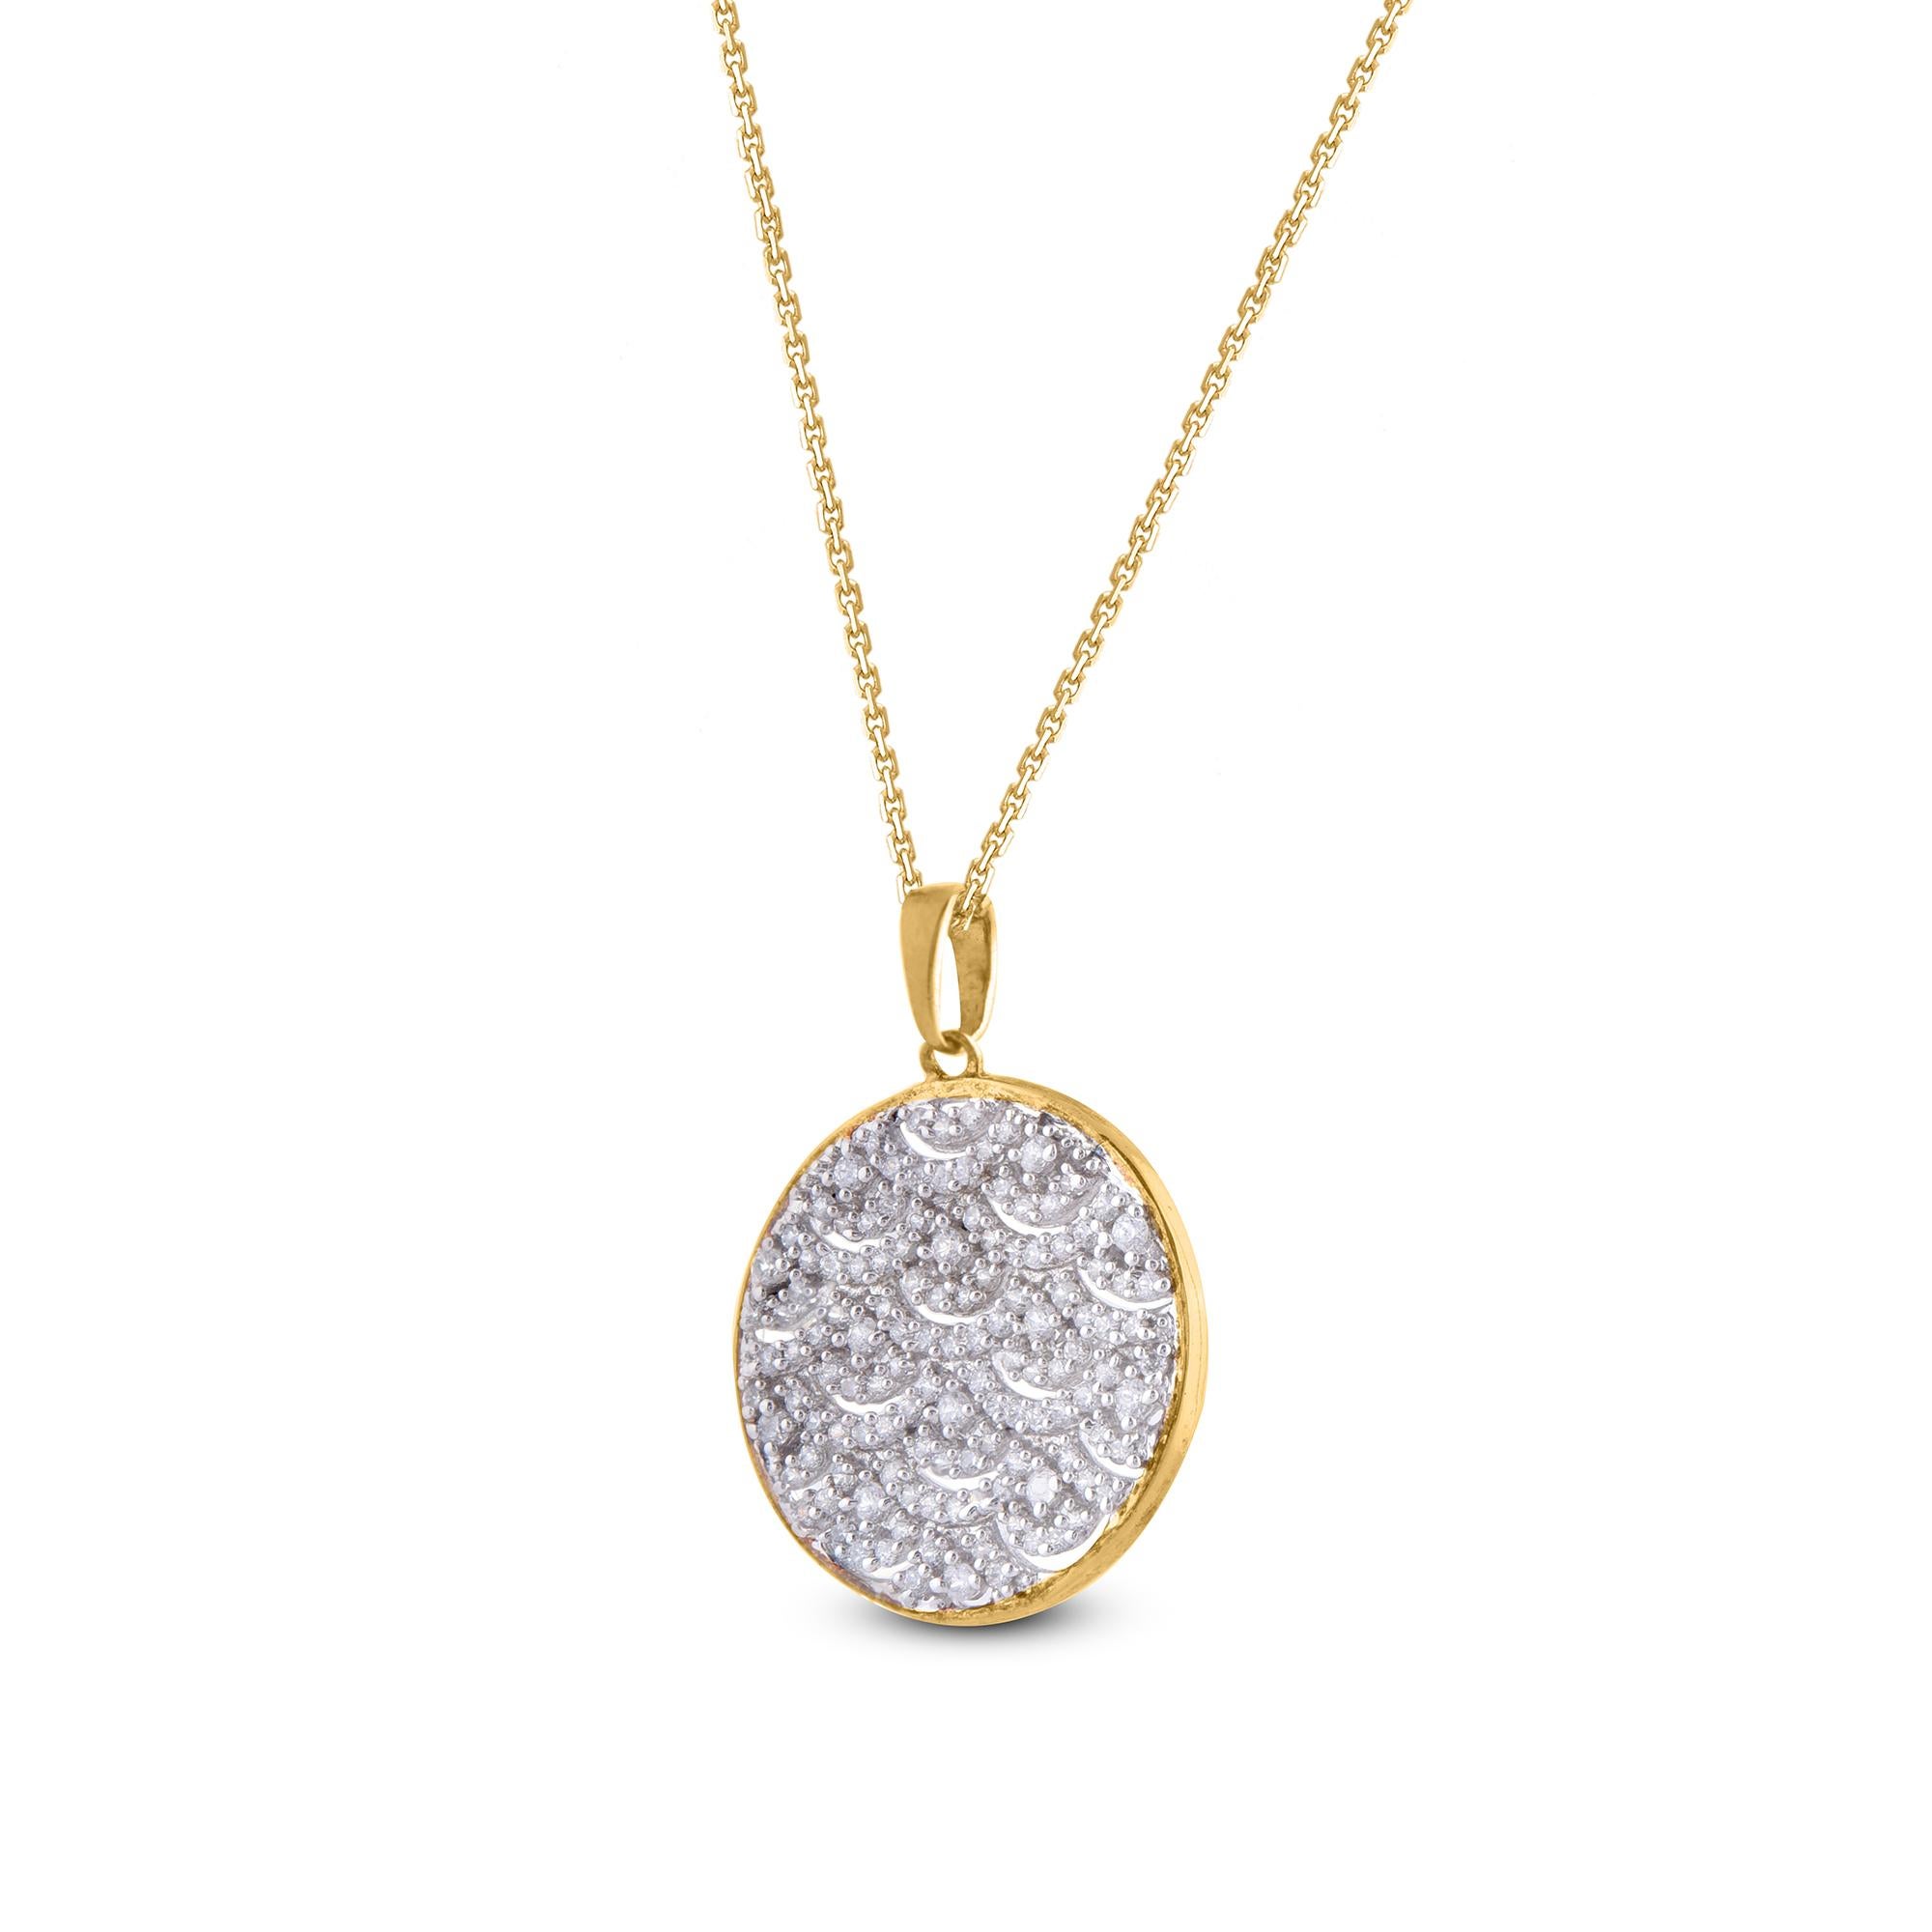 A bright pop of sparkle in a designer diamond pendant that will go well on any outfit. Embellished with 127 round diamond set in prong setting and crafted by our in-house experts in 14 karat yellow gold. The total diamond weight is 0.50 carat and it